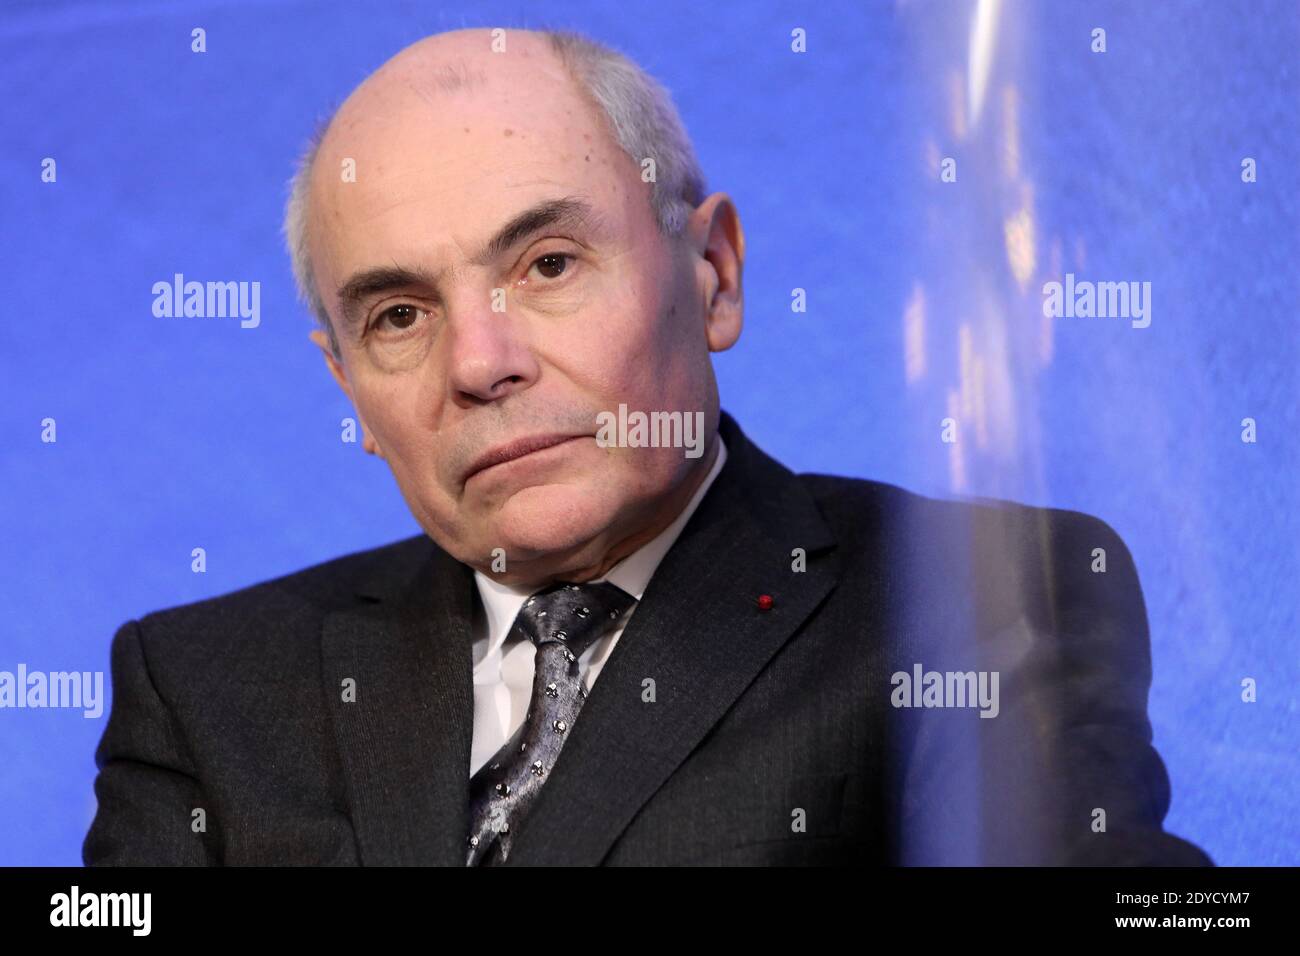 Thierry Lataste, chief of staff of French Interior minister attends the presentation of the report of the past year and the prospects of the security policy for the upcoming year, in Paris, France on January 18, 2013 Photo by Stephane Lemouton/ABACAPRESS.COM. Stock Photo